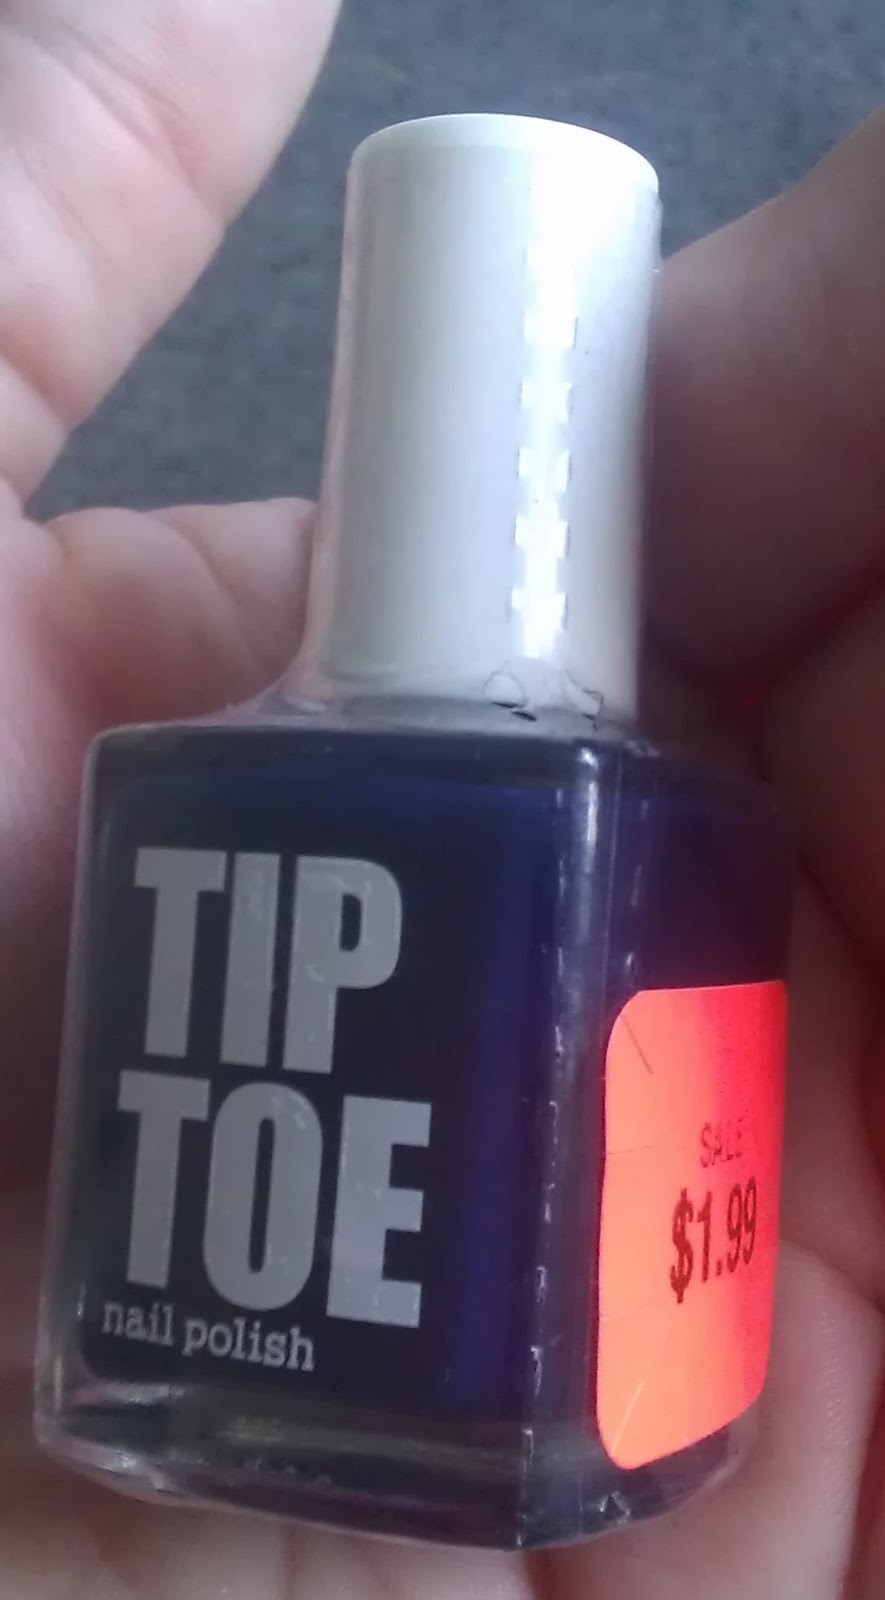 Tip Toe Nail Polish from Old Navy in Navy Marine. On Sale for 1.99.